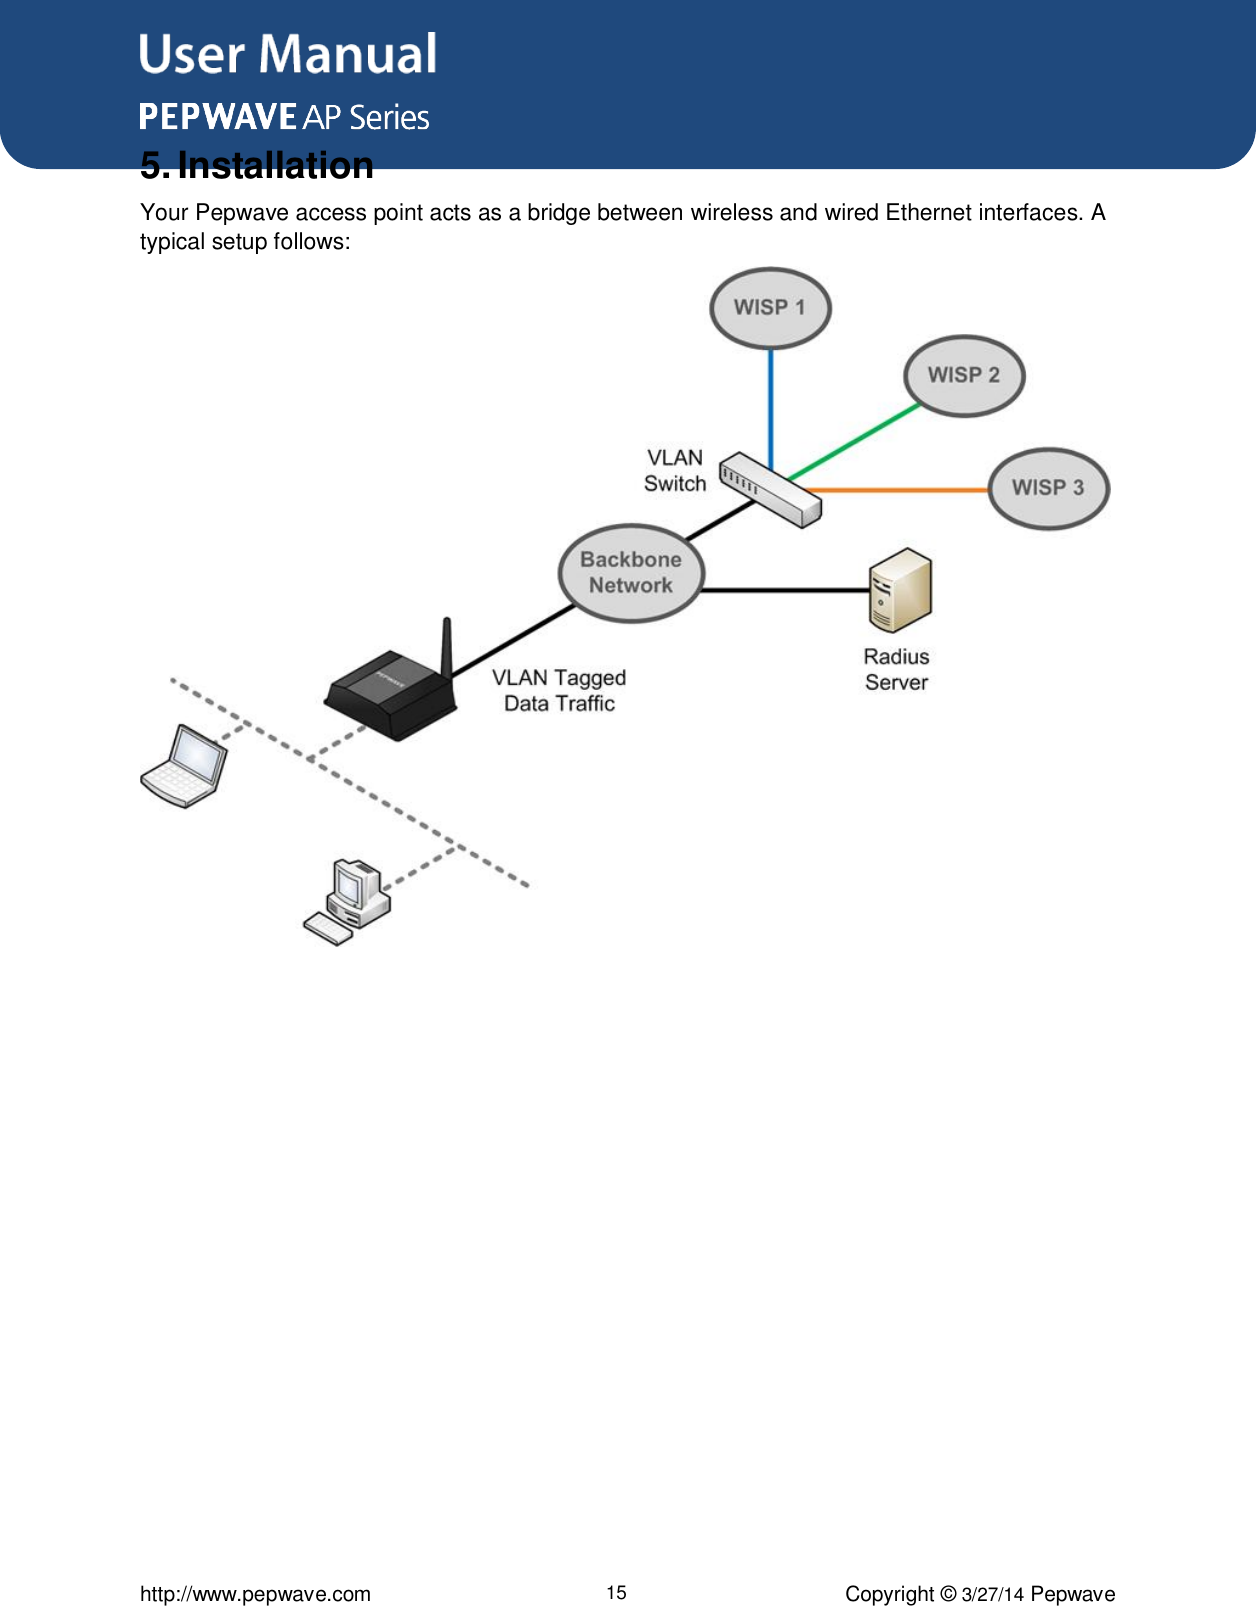 User Manual      http://www.pepwave.com 15 Copyright ©  3/27/14 Pepwave 5. Installation Your Pepwave access point acts as a bridge between wireless and wired Ethernet interfaces. A typical setup follows:   